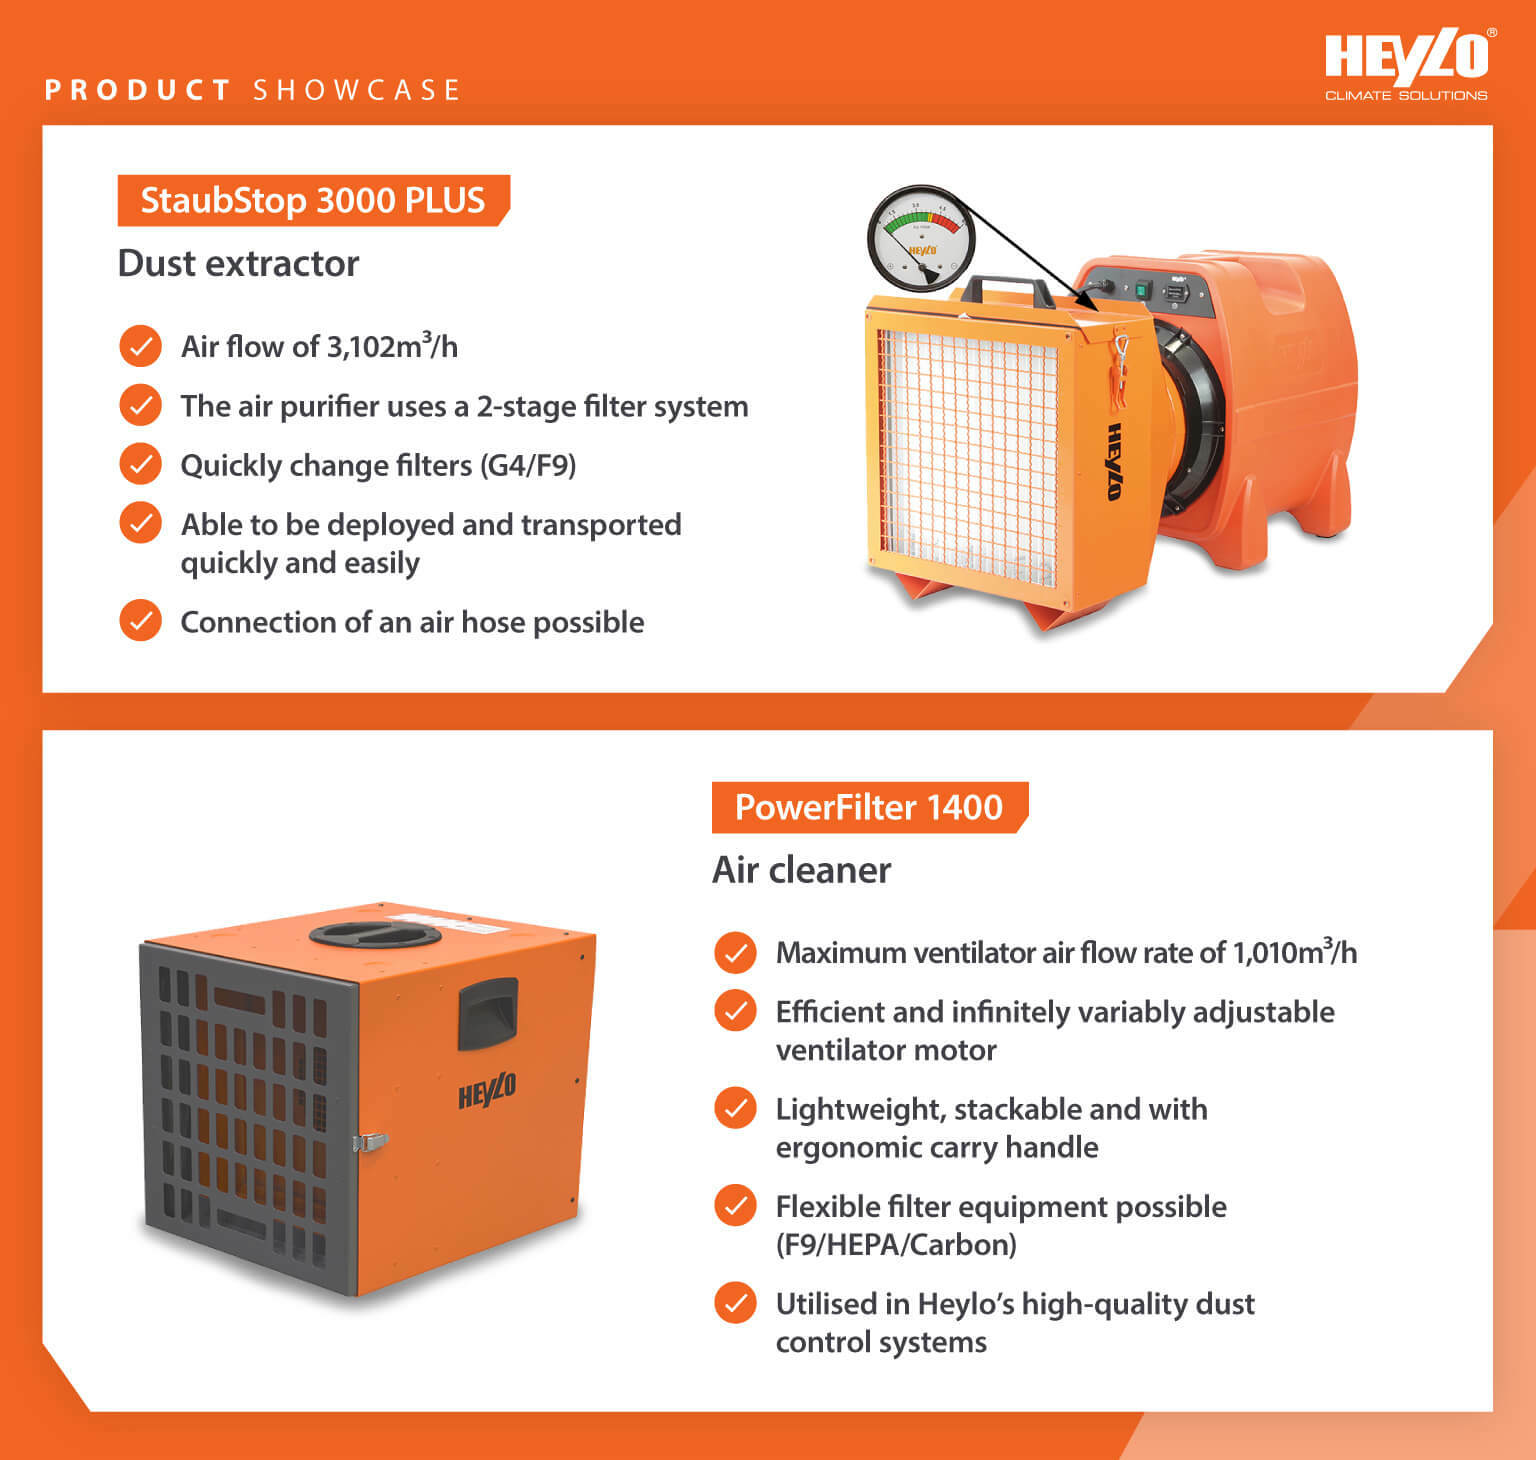 Product showcase comparing features of Heylo dust extractors and air cleaners for building and construction workers